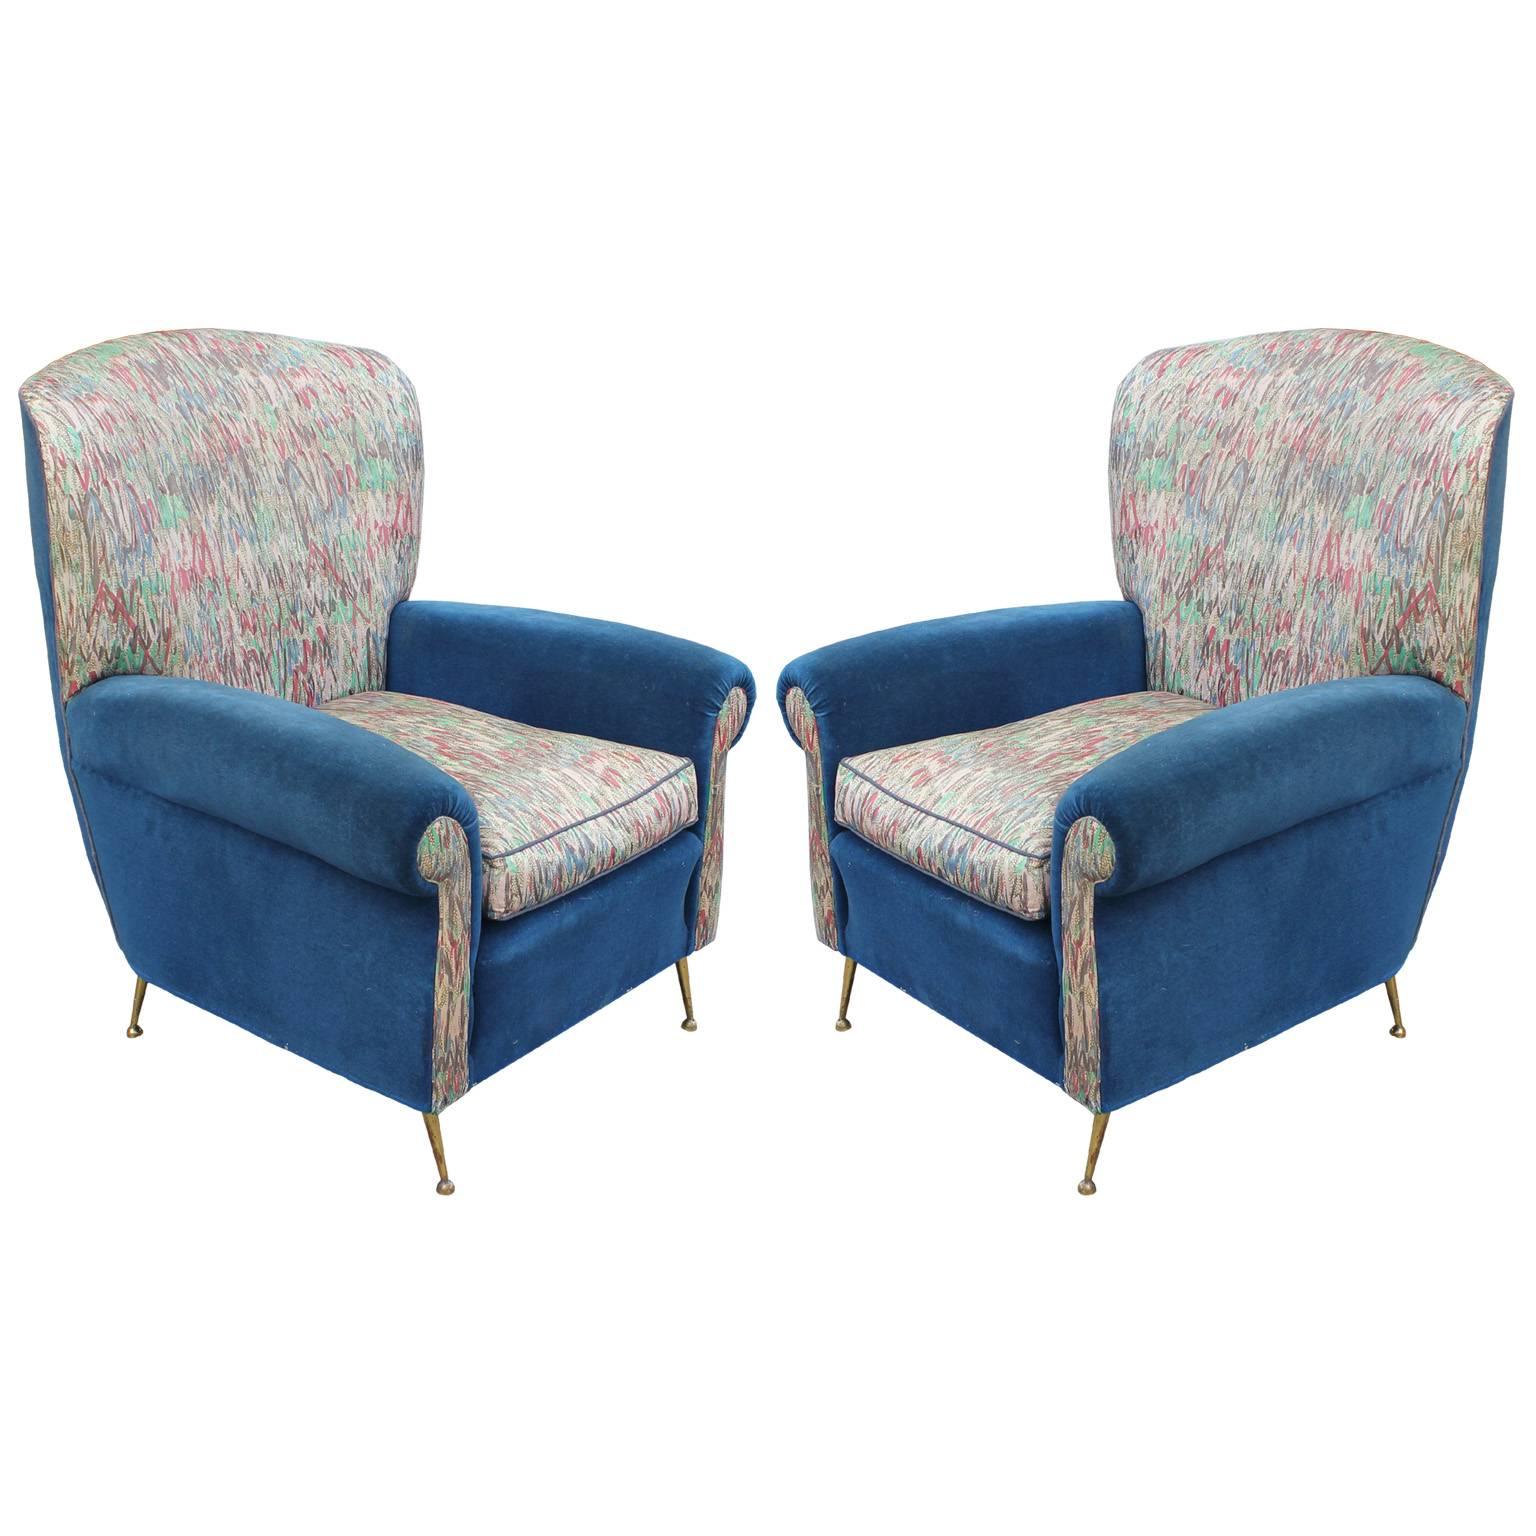 Pair of Brass Legged Italian Modern Lounge Chairs with Blue Velvet and Floral